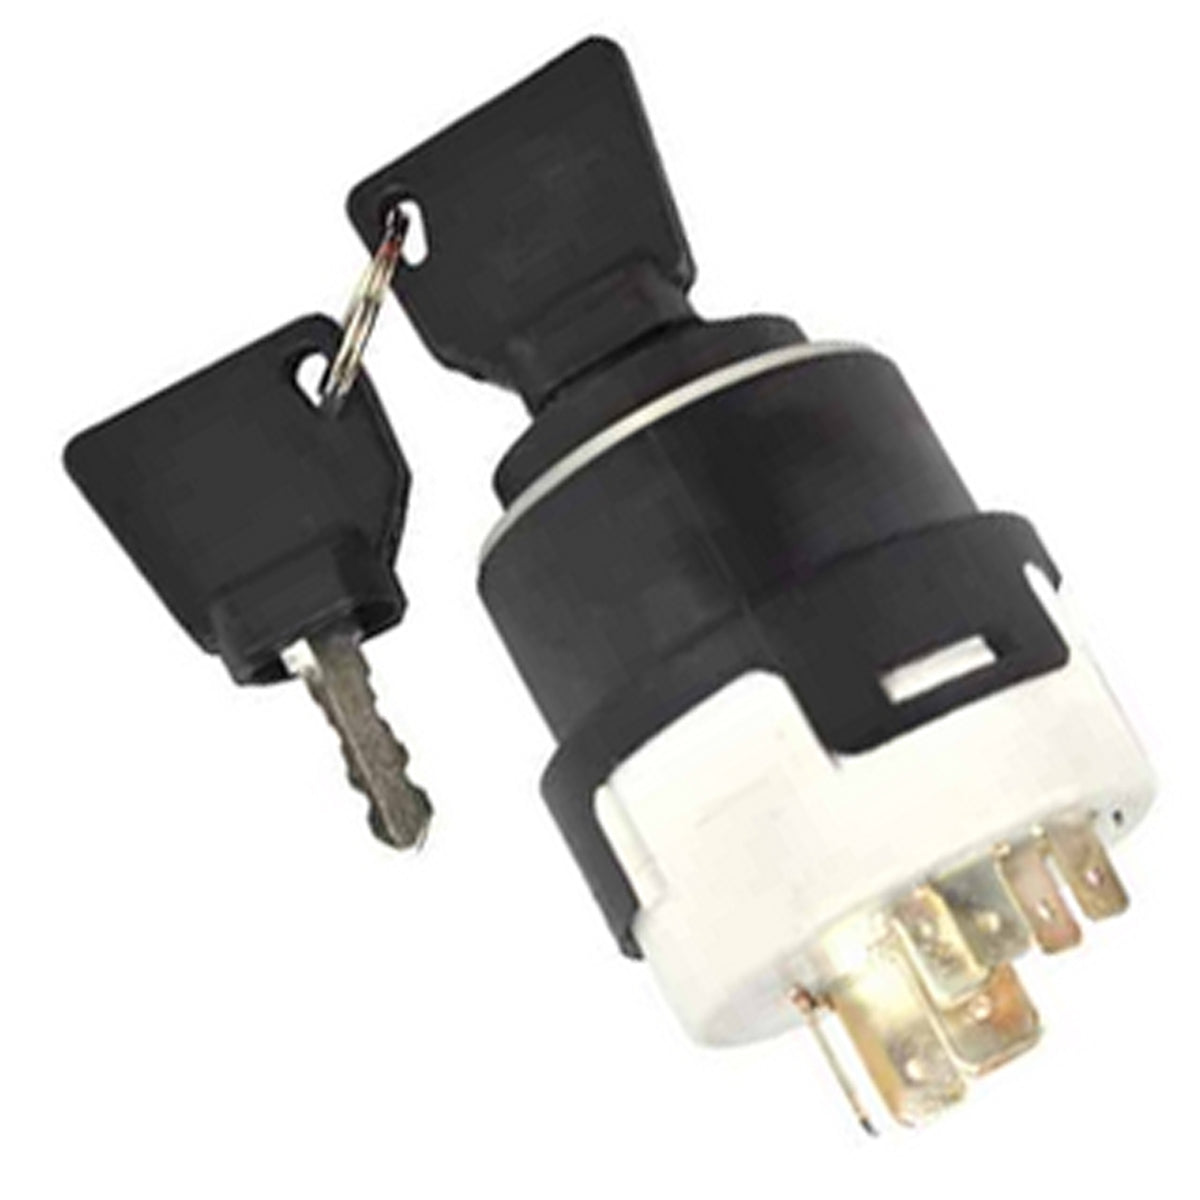 Starter Ignition Switch for JCB Dump Truck Tracked Wheeled Excavator L ...